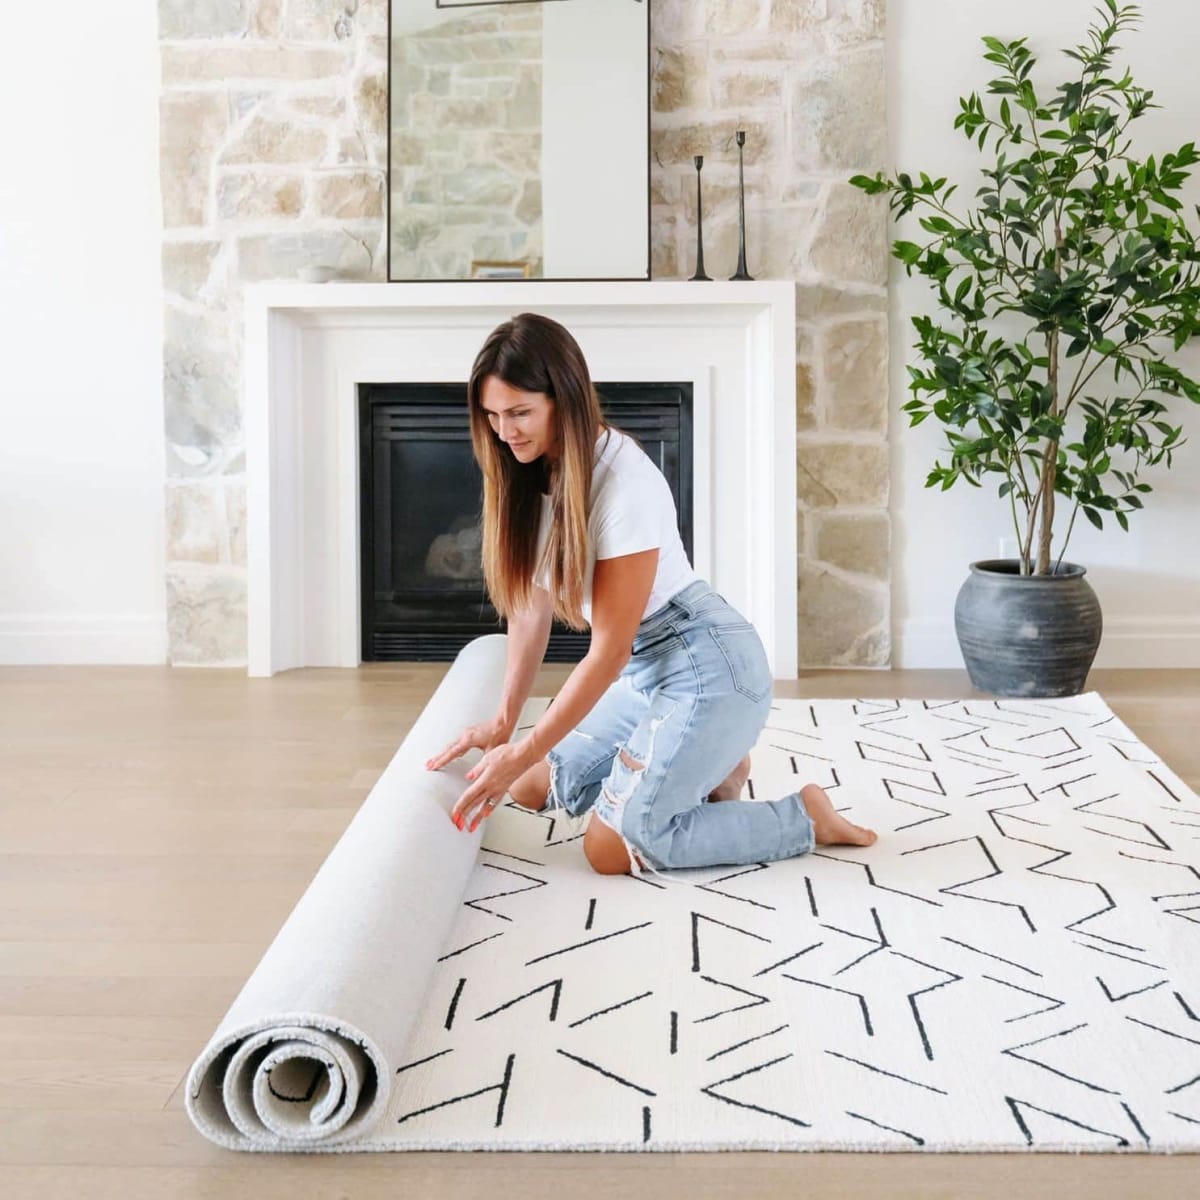 https://res.cloudinary.com/castlery/image/upload/w_1200,f_auto,q_auto/v1667224311/blogs/The%20Ideal%20Rug%20to%20Style%20your%20Living%20Space/lorenzo_wool_area_rug_designlovesdetail.jpg